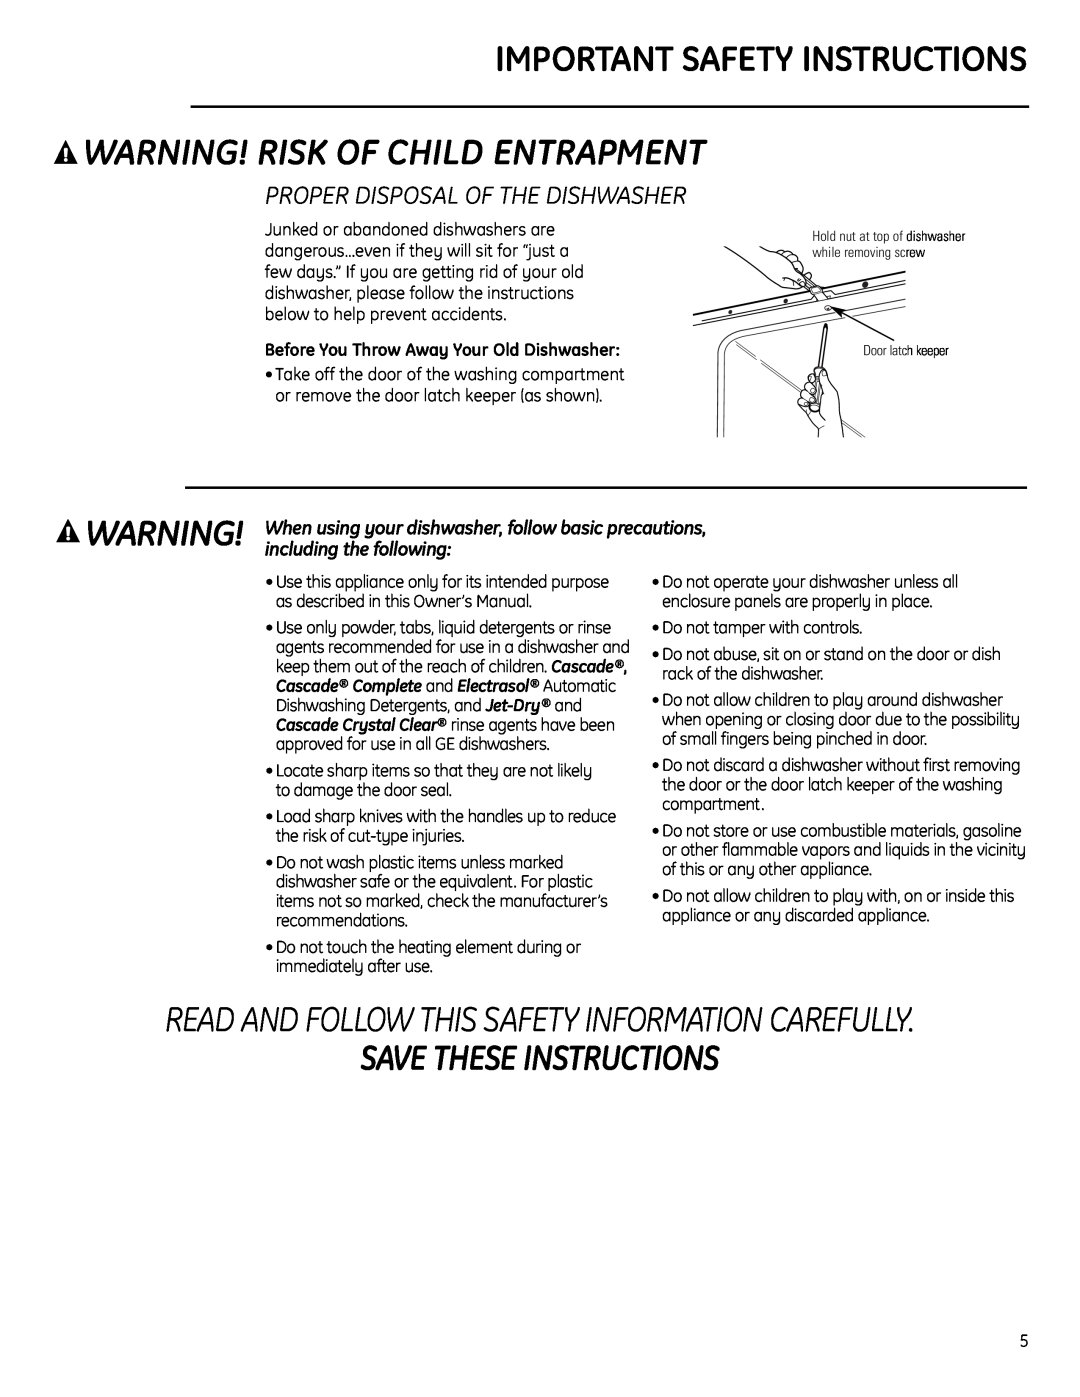 GE ZBD1870 owner manual Warning! Risk Of Child Entrapment, Save These Instructions, Important Safety Instructions 